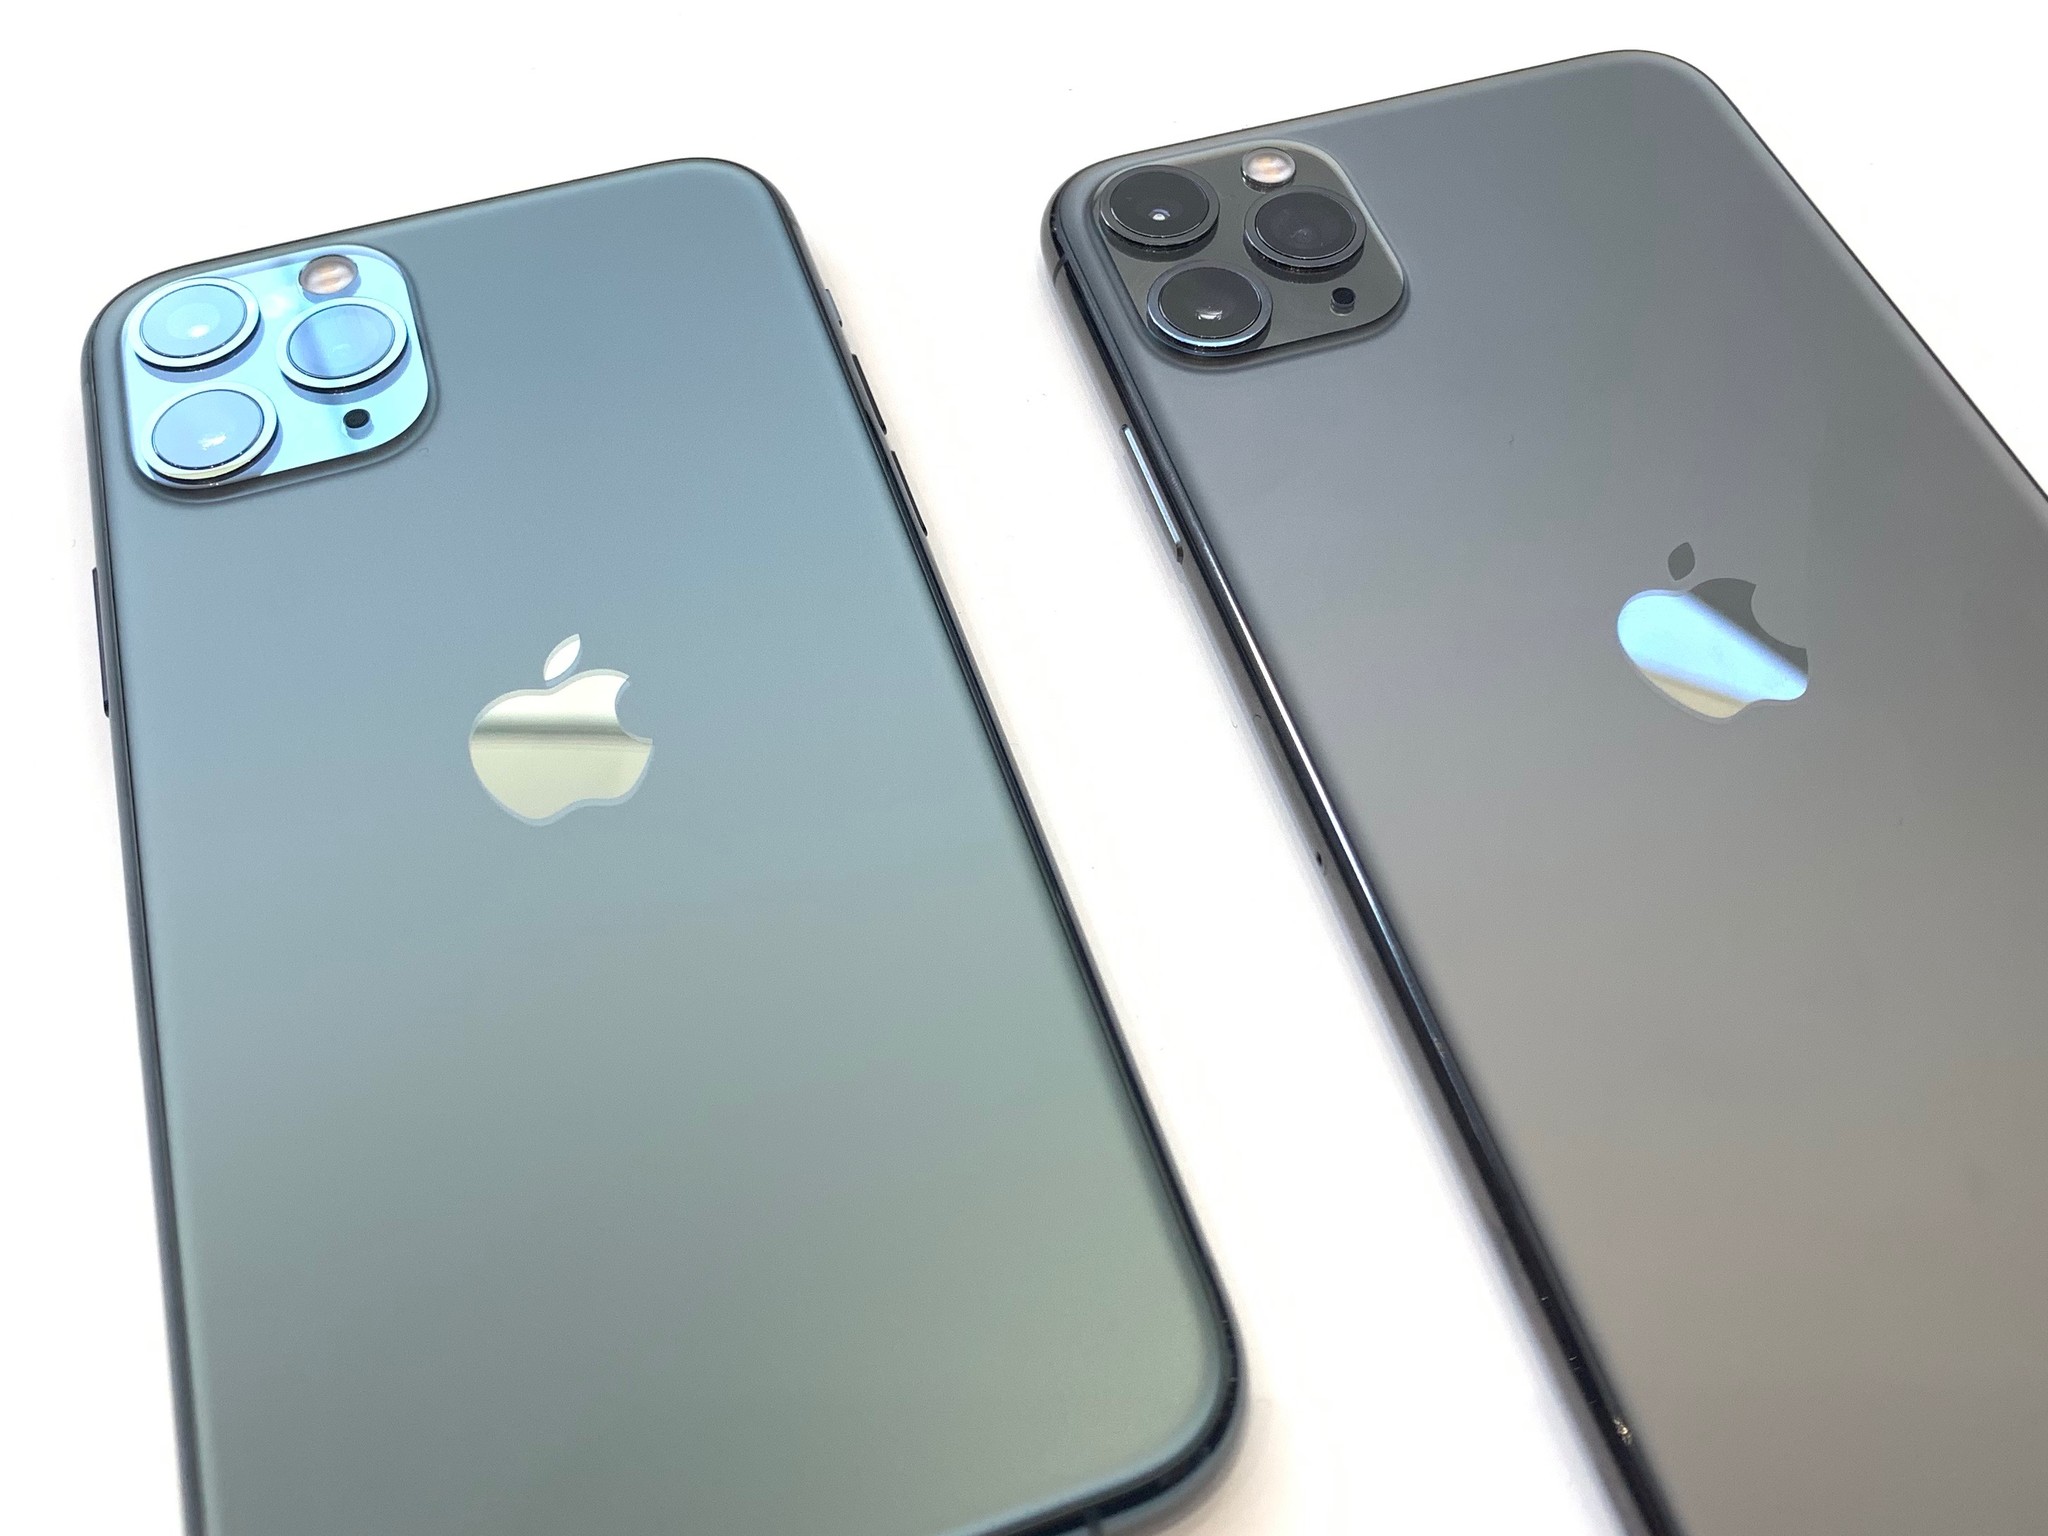 iPhone 11 Pro in Midnight Green and Space Black